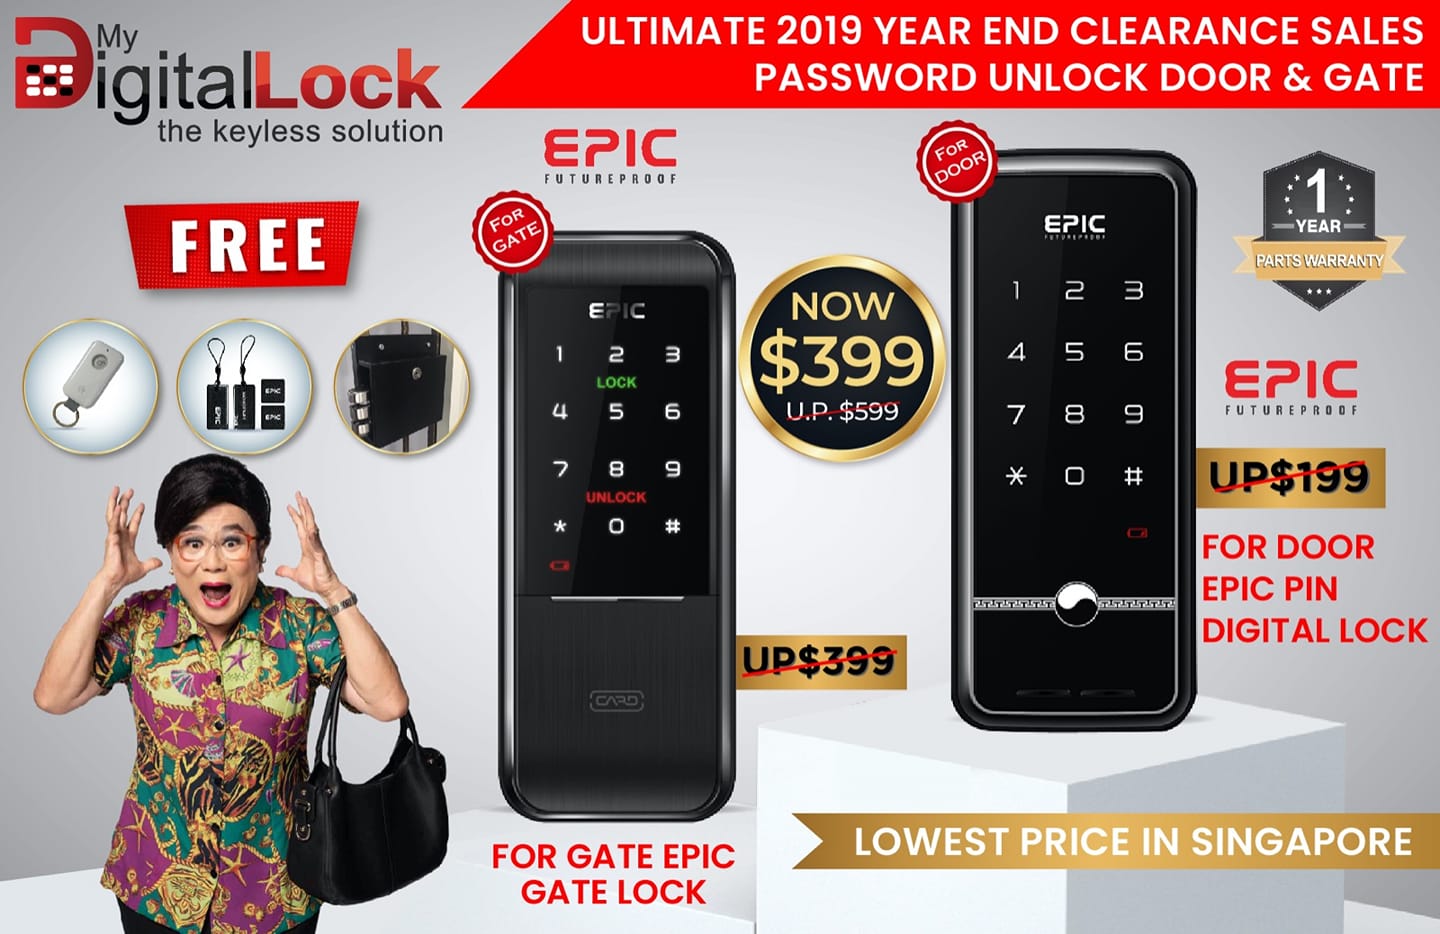 WTS: Cheapest EPIC Card Digital Lock for HDB Fire Rated Main Door and Gate $399 Hp 98440884